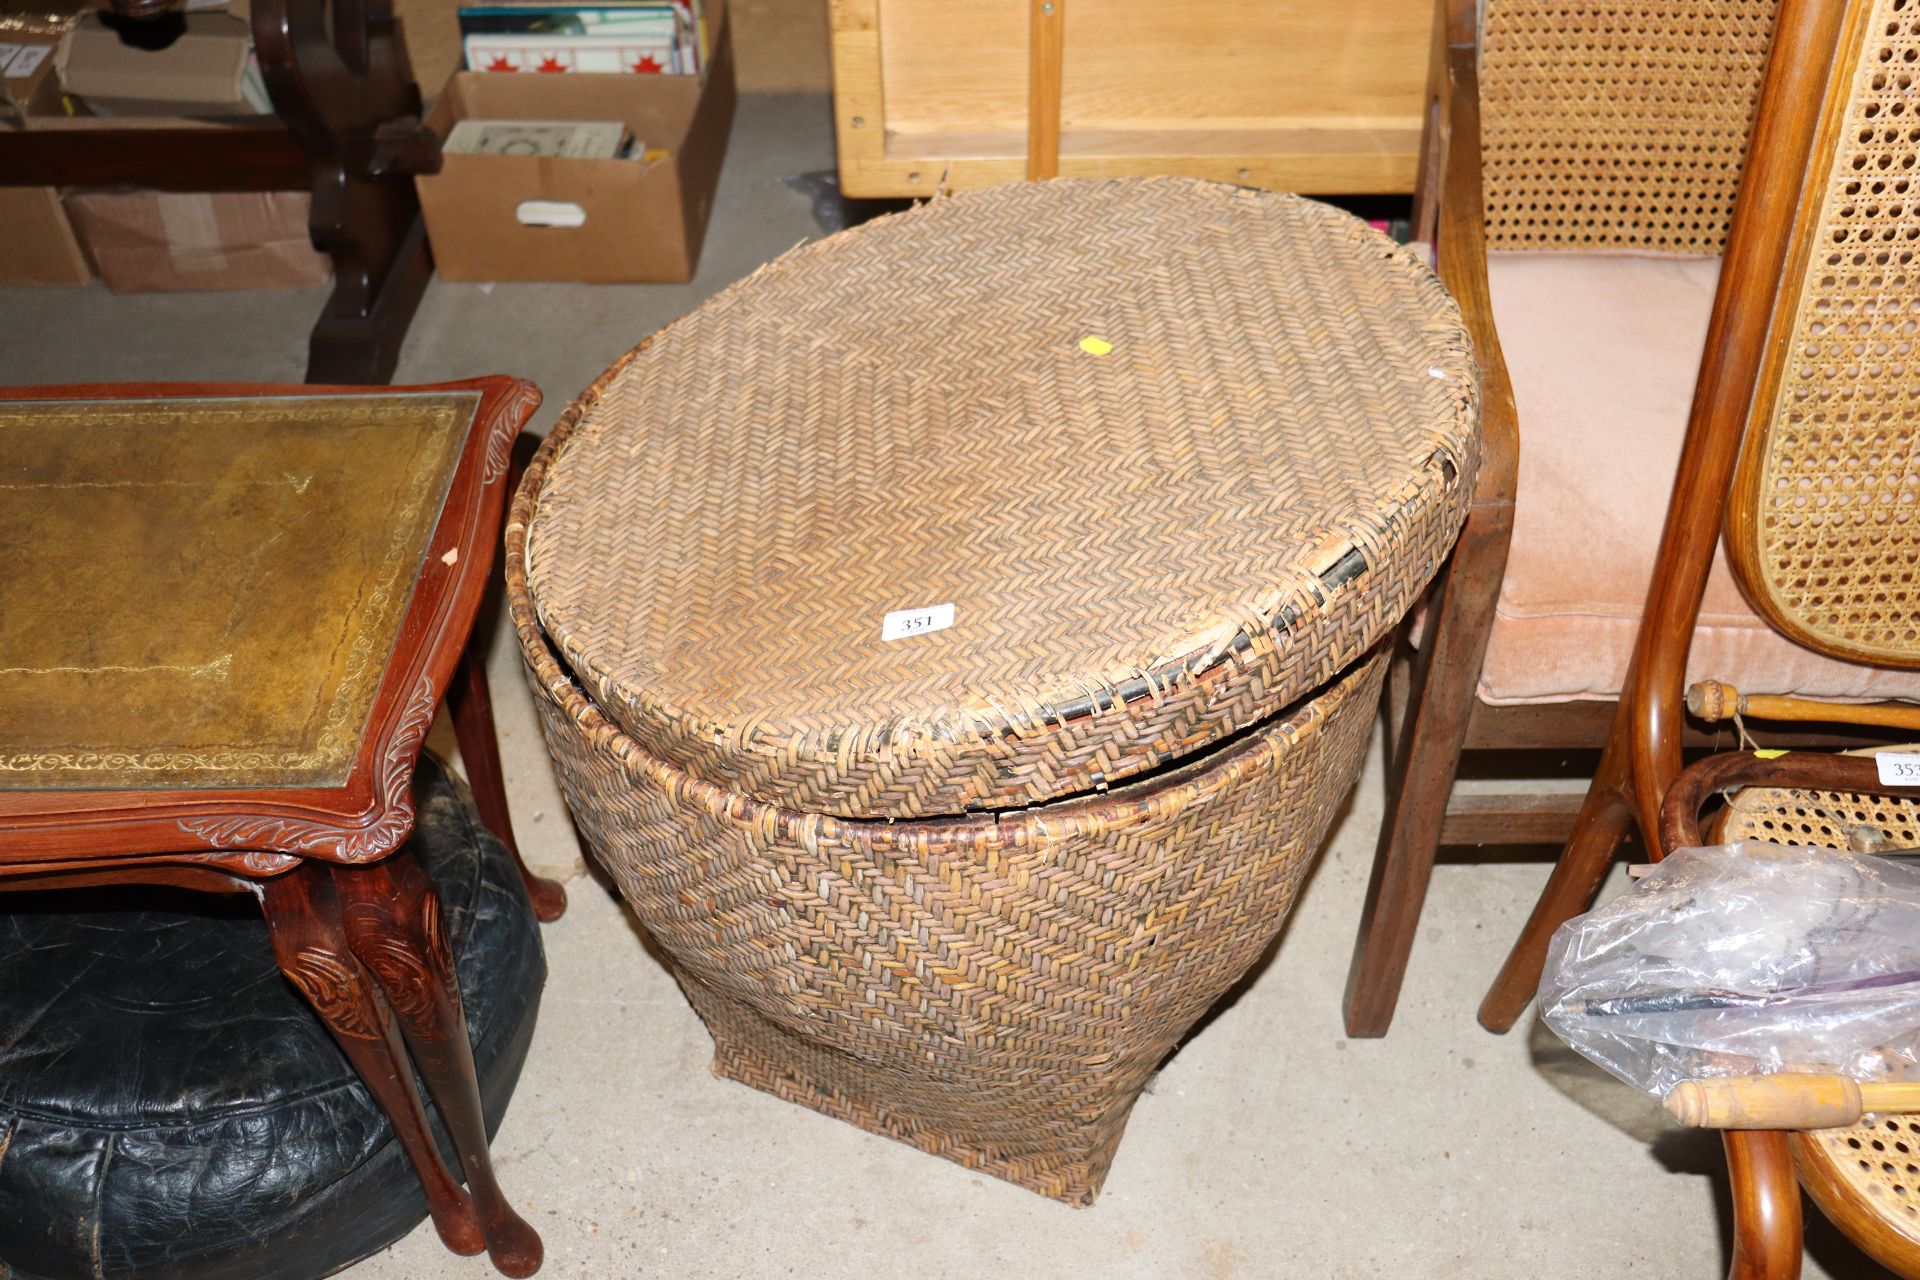 A wicker covered basket and lid